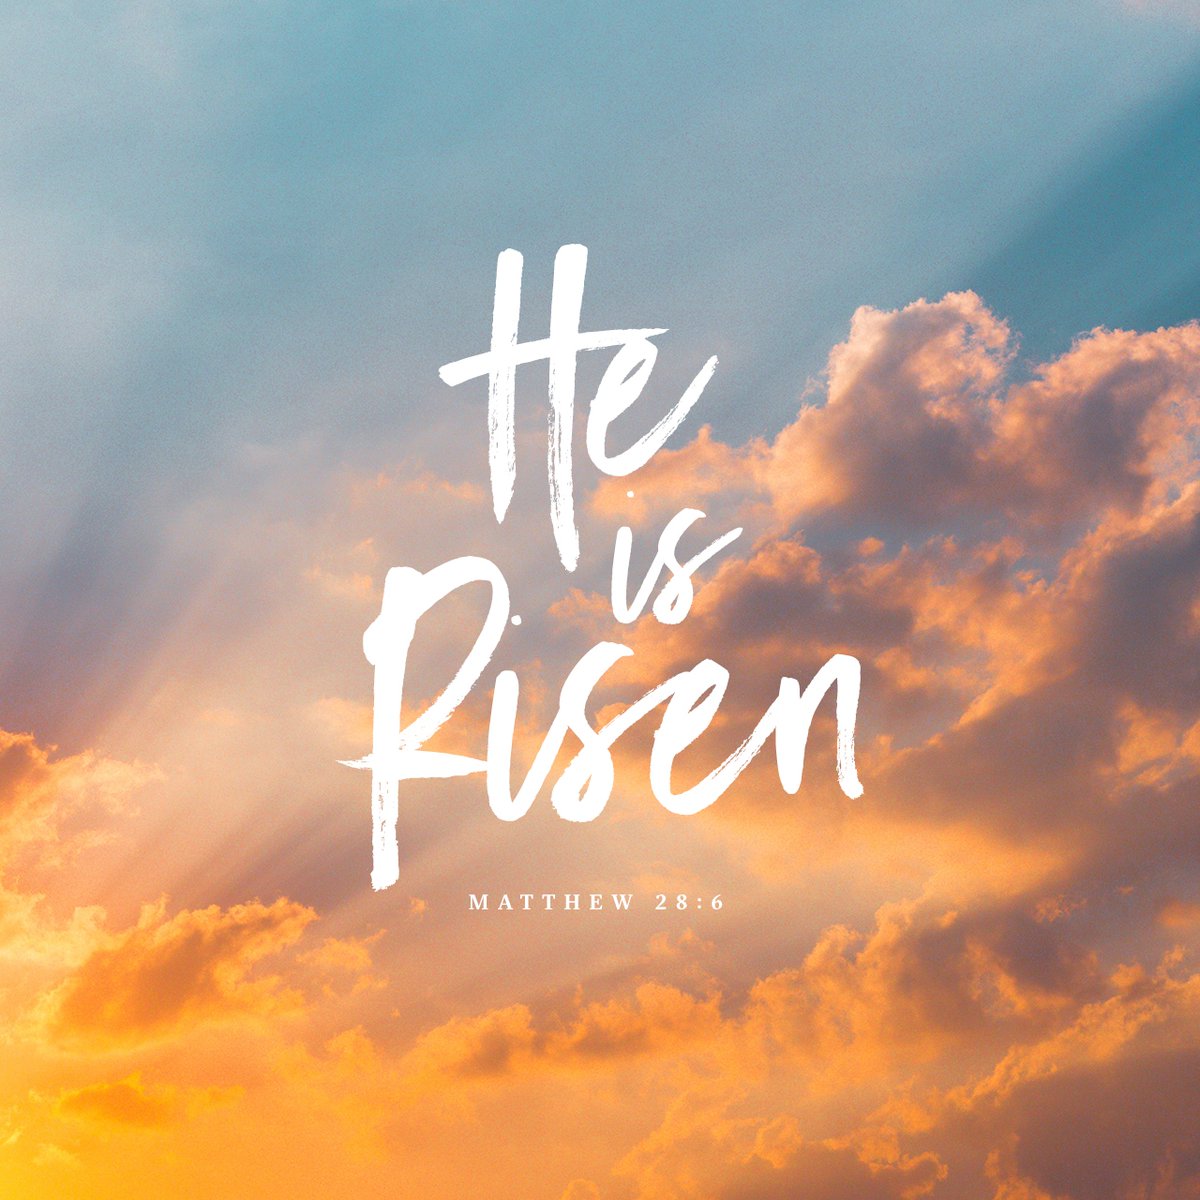 Matthew 28: 5-6 - The angel said to the women, “Do not be afraid, for I know that you are looking for Jesus, who was crucified. He is not here; he has risen, just as he said.  Today we celebrate our risen Savior Jesus! #HeIsRisen